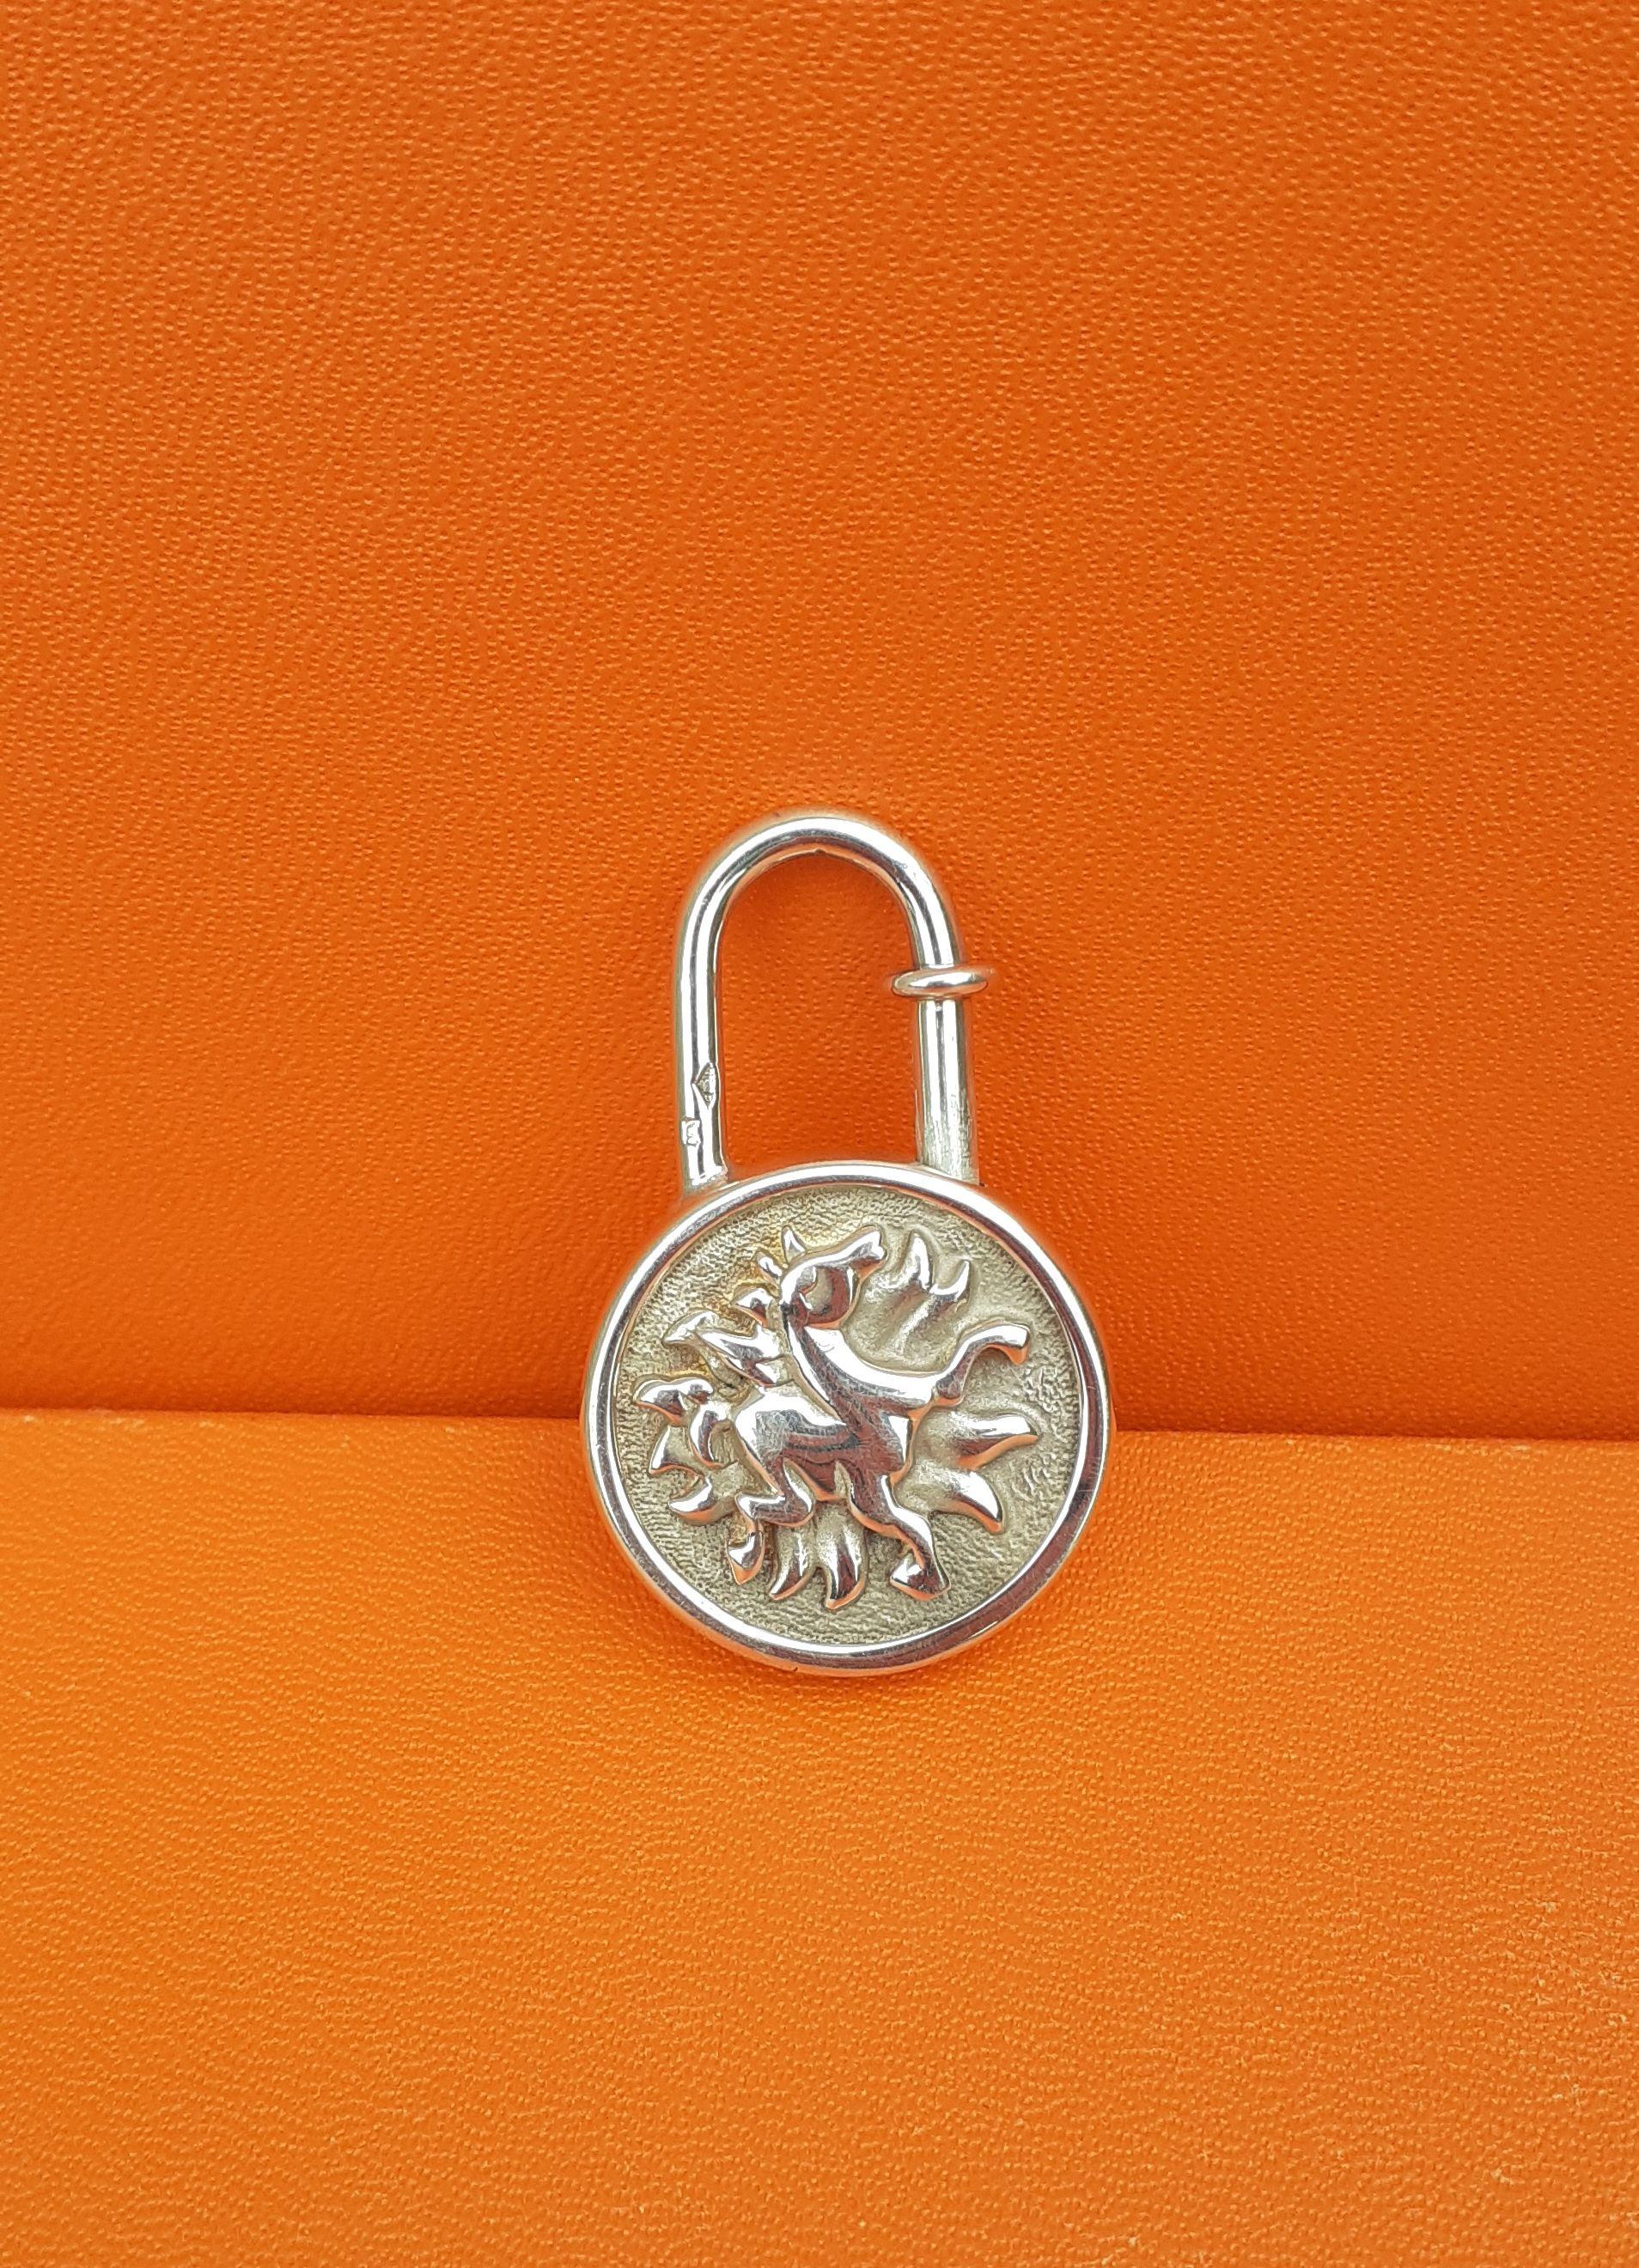 Collectible Authentic Hermès Padlock

Can be used as bag Charm

Round shape with a sun and a horse in the middle

Special Edition for the Hermès year of the sun 1994

Made of silver

Colorway: silvery

